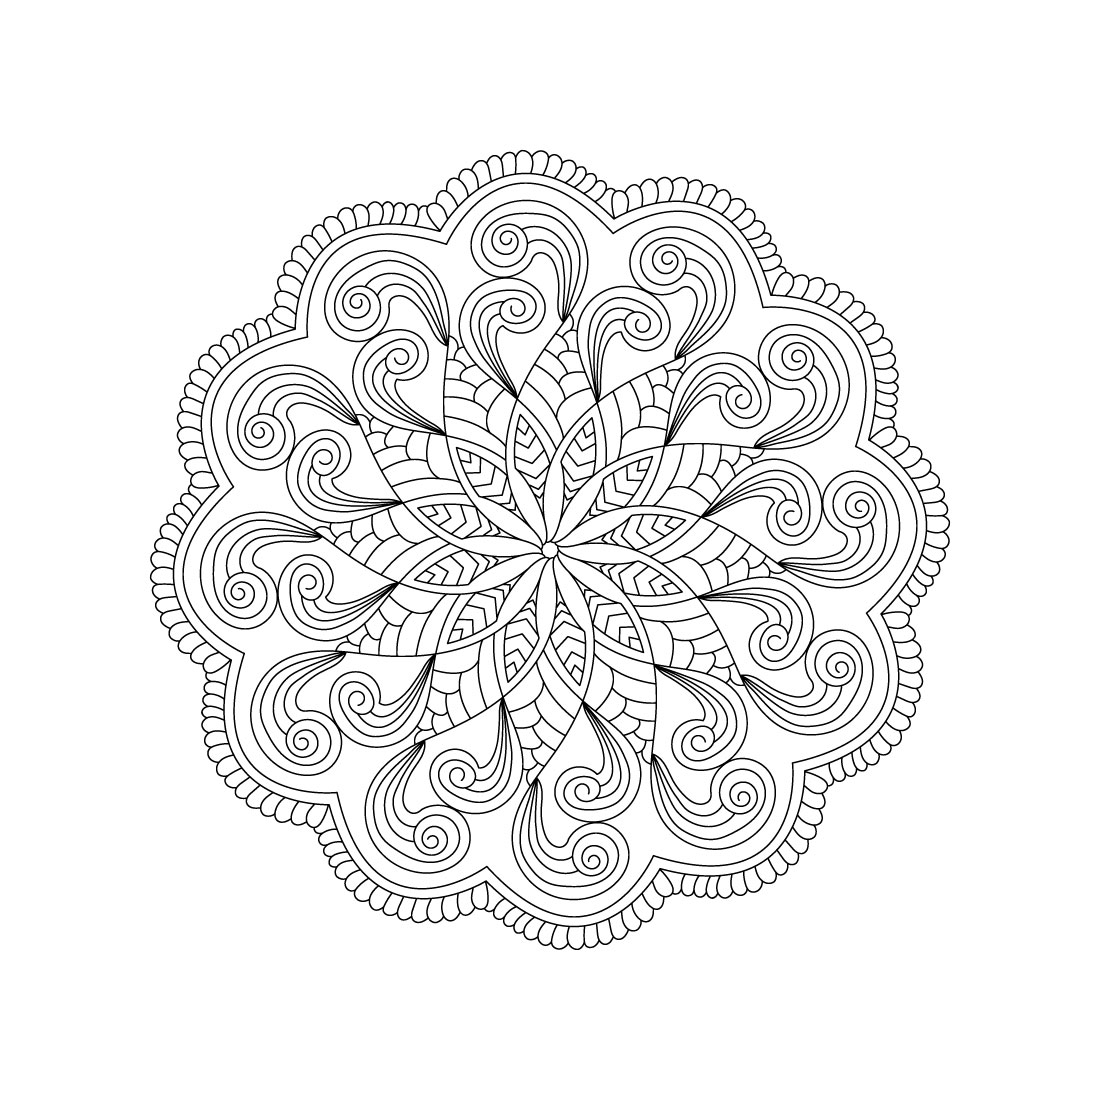 Bundle of 10 Tranquillity Mandala for KDP Colouring Book interior Pages preview image.